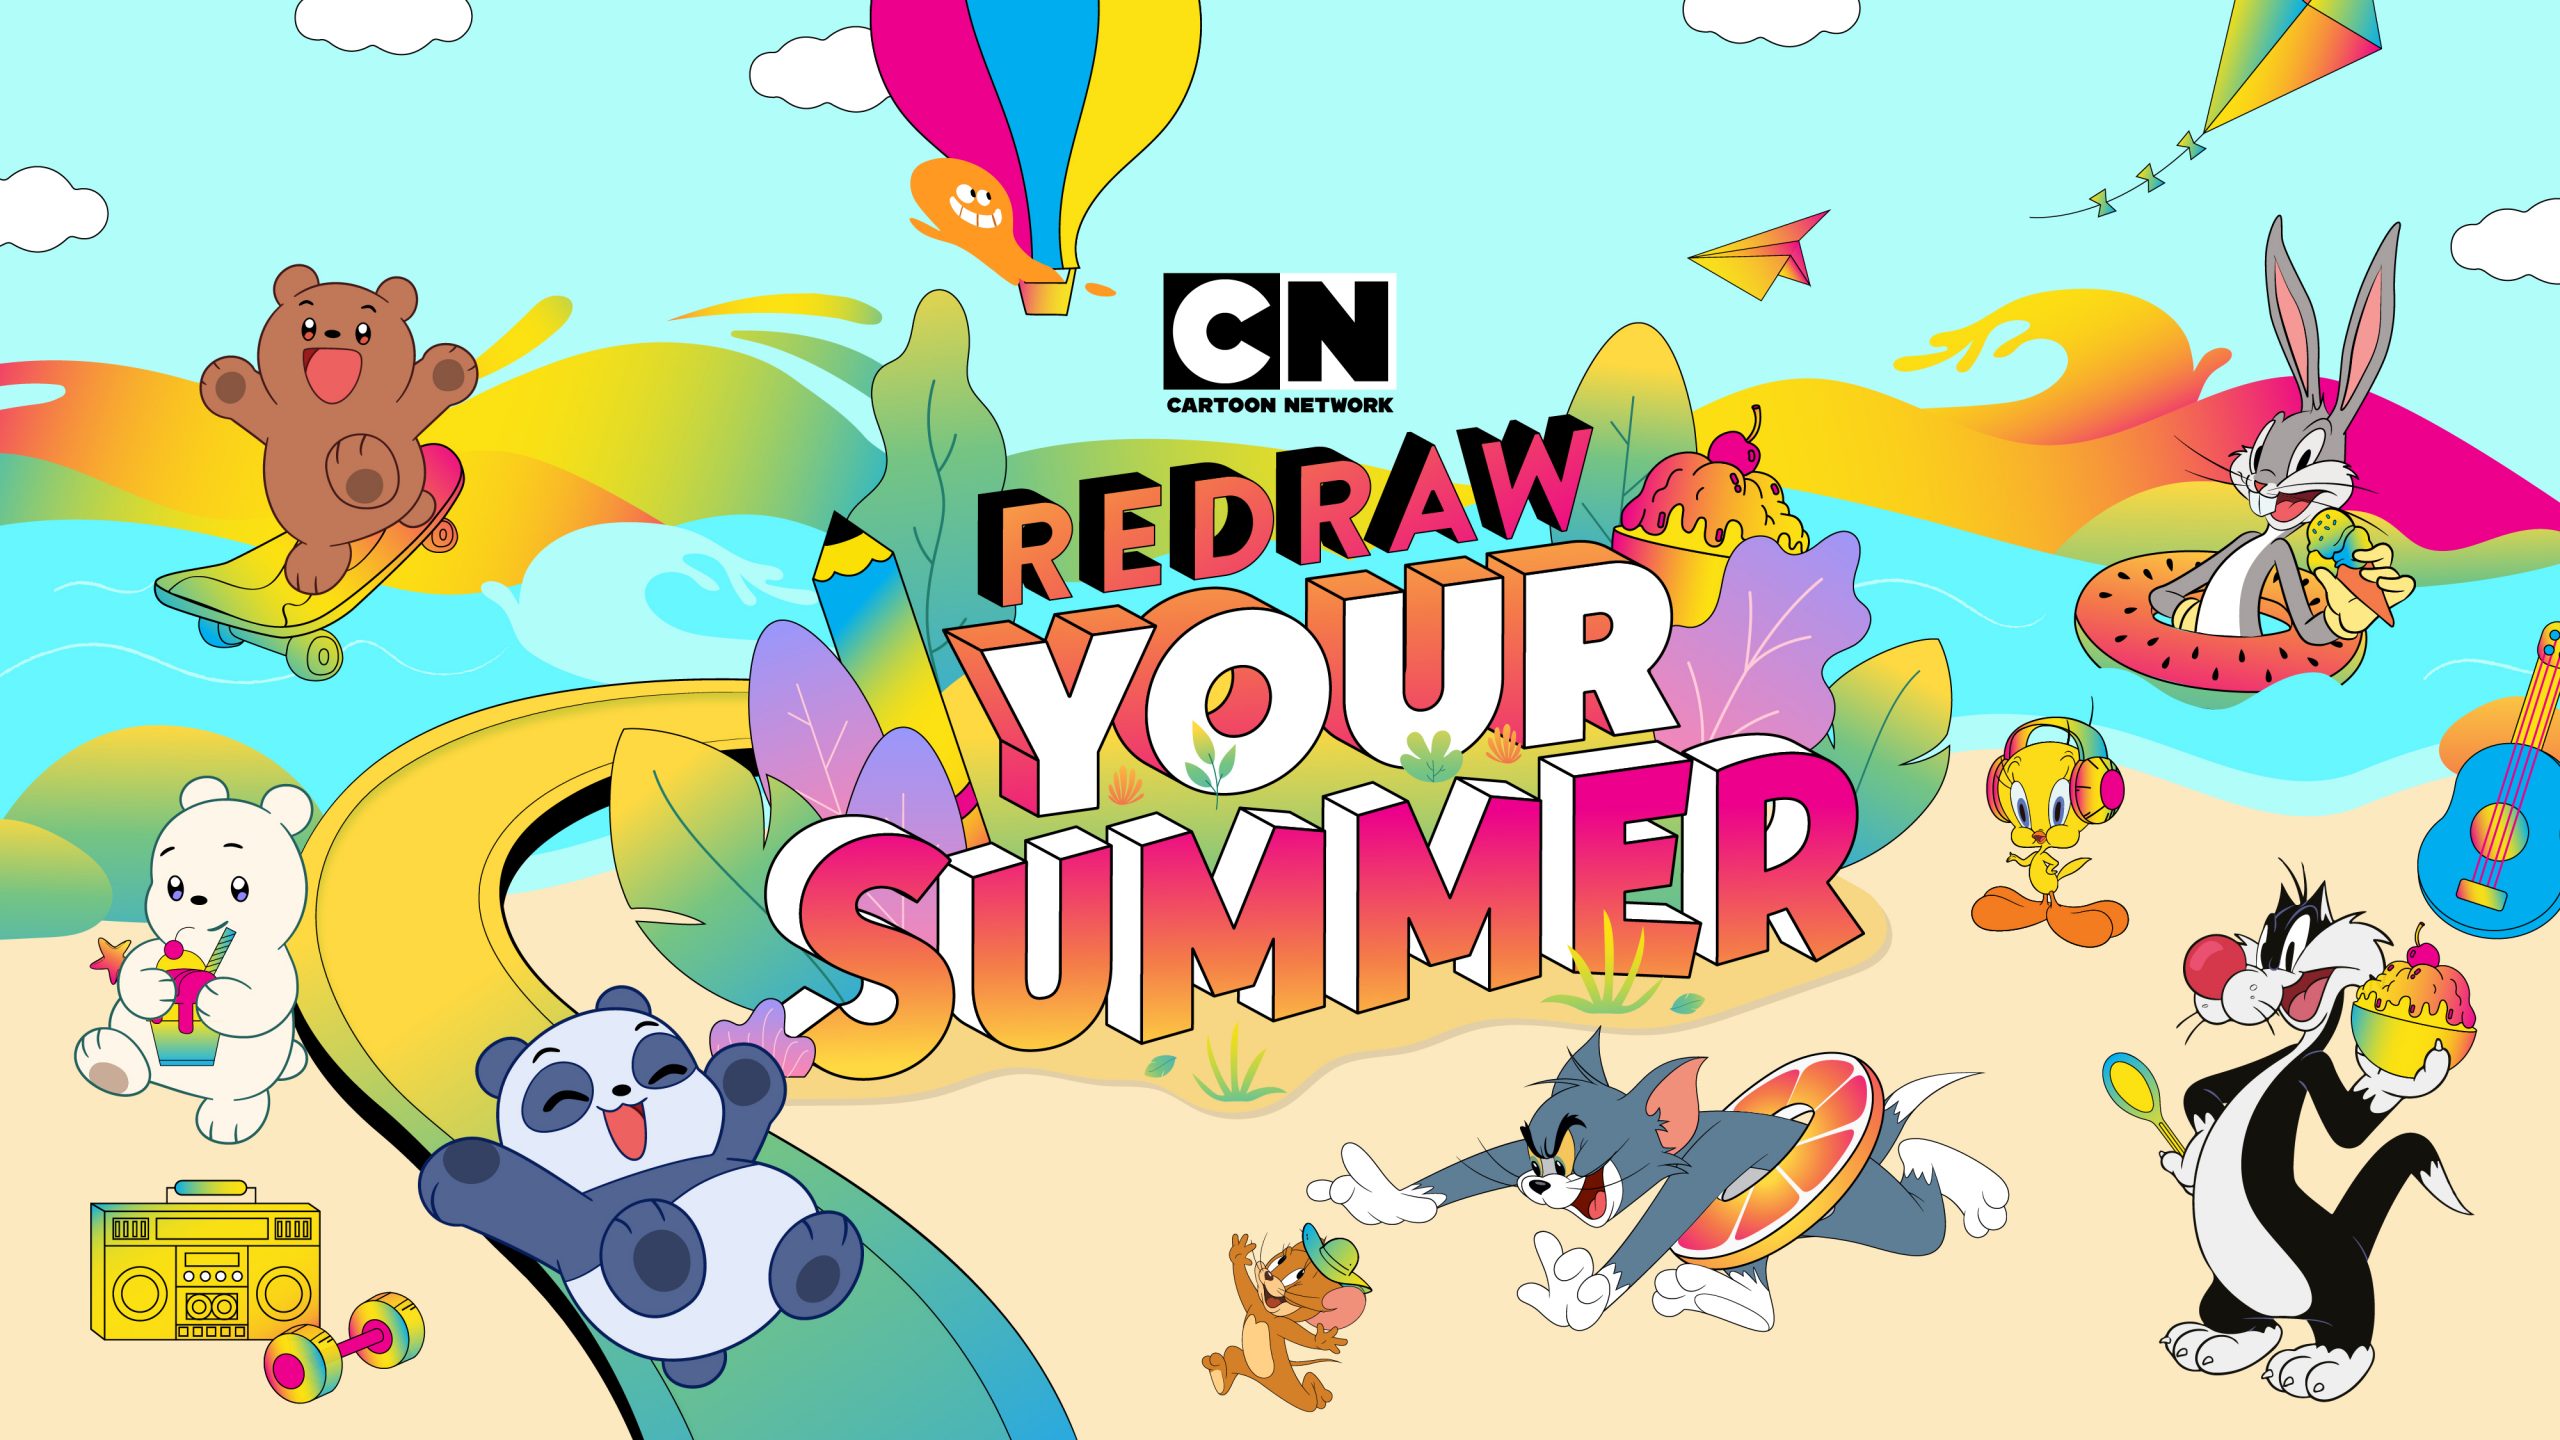 EXCITING ACTIVITIES AT DOWNTOWN EAST THIS SCHOOL HOLIDAY WITH CARTOON  NETWORK EVENTS, MOVIE SCREENING, FREEBIES & MORE! – Shout